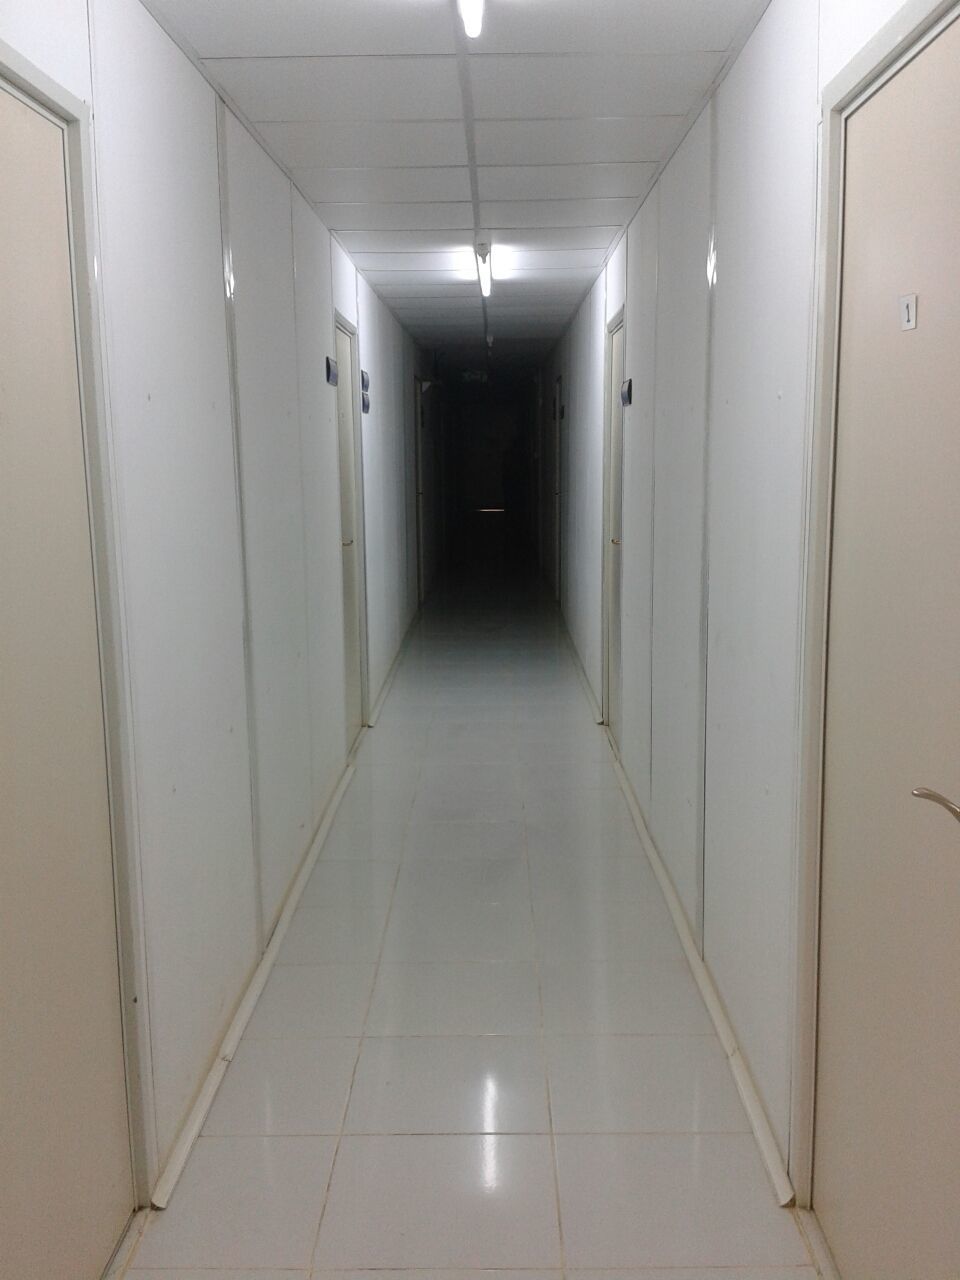 indoors, corridor, illuminated, architecture, the way forward, built structure, lighting equipment, ceiling, empty, diminishing perspective, wall - building feature, door, absence, flooring, wall, building, narrow, tiled floor, in a row, no people